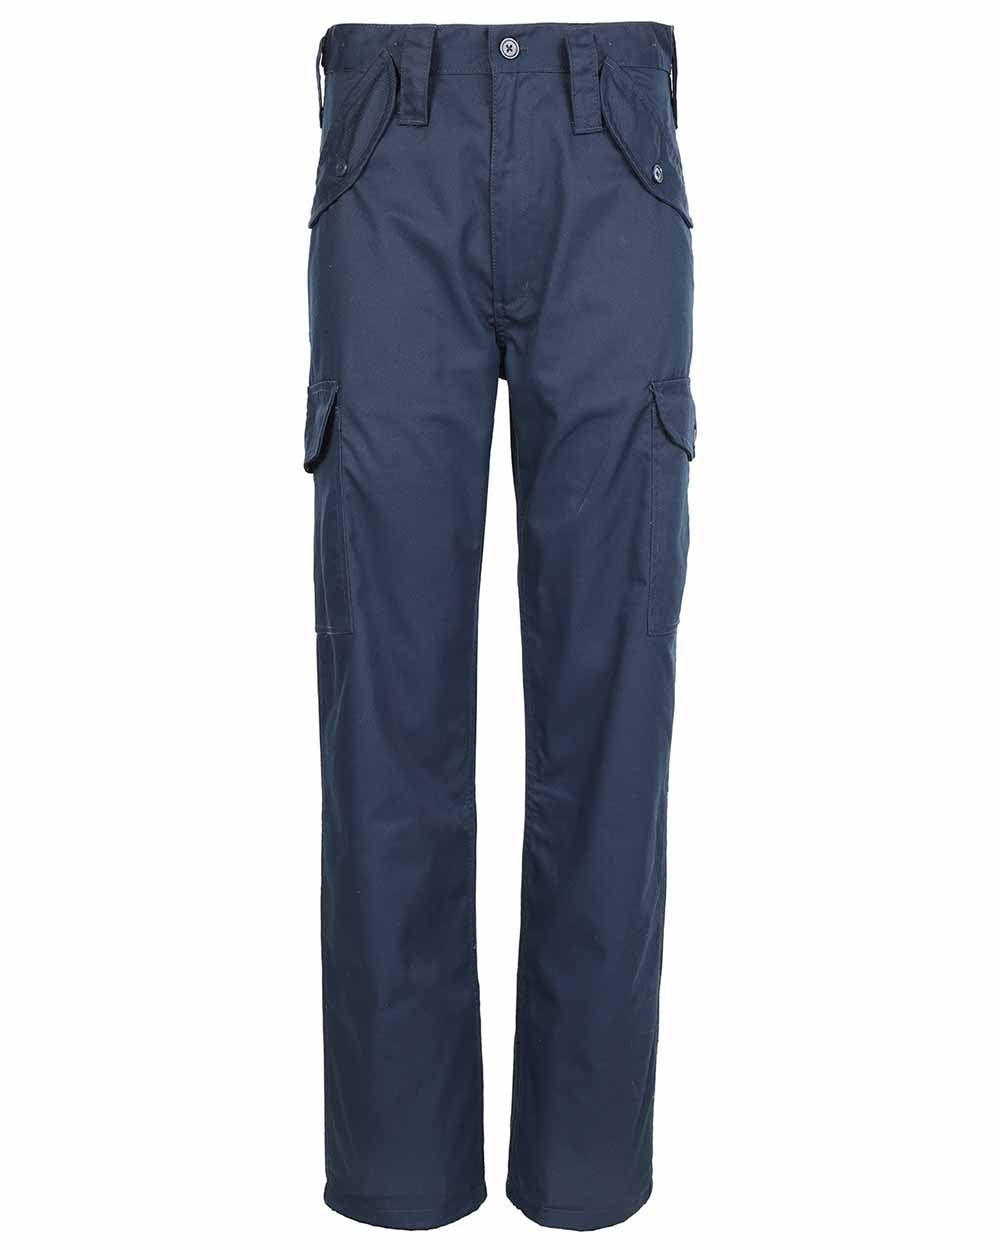 Buy Blue Trousers & Pants for Men by GAS Online | Ajio.com